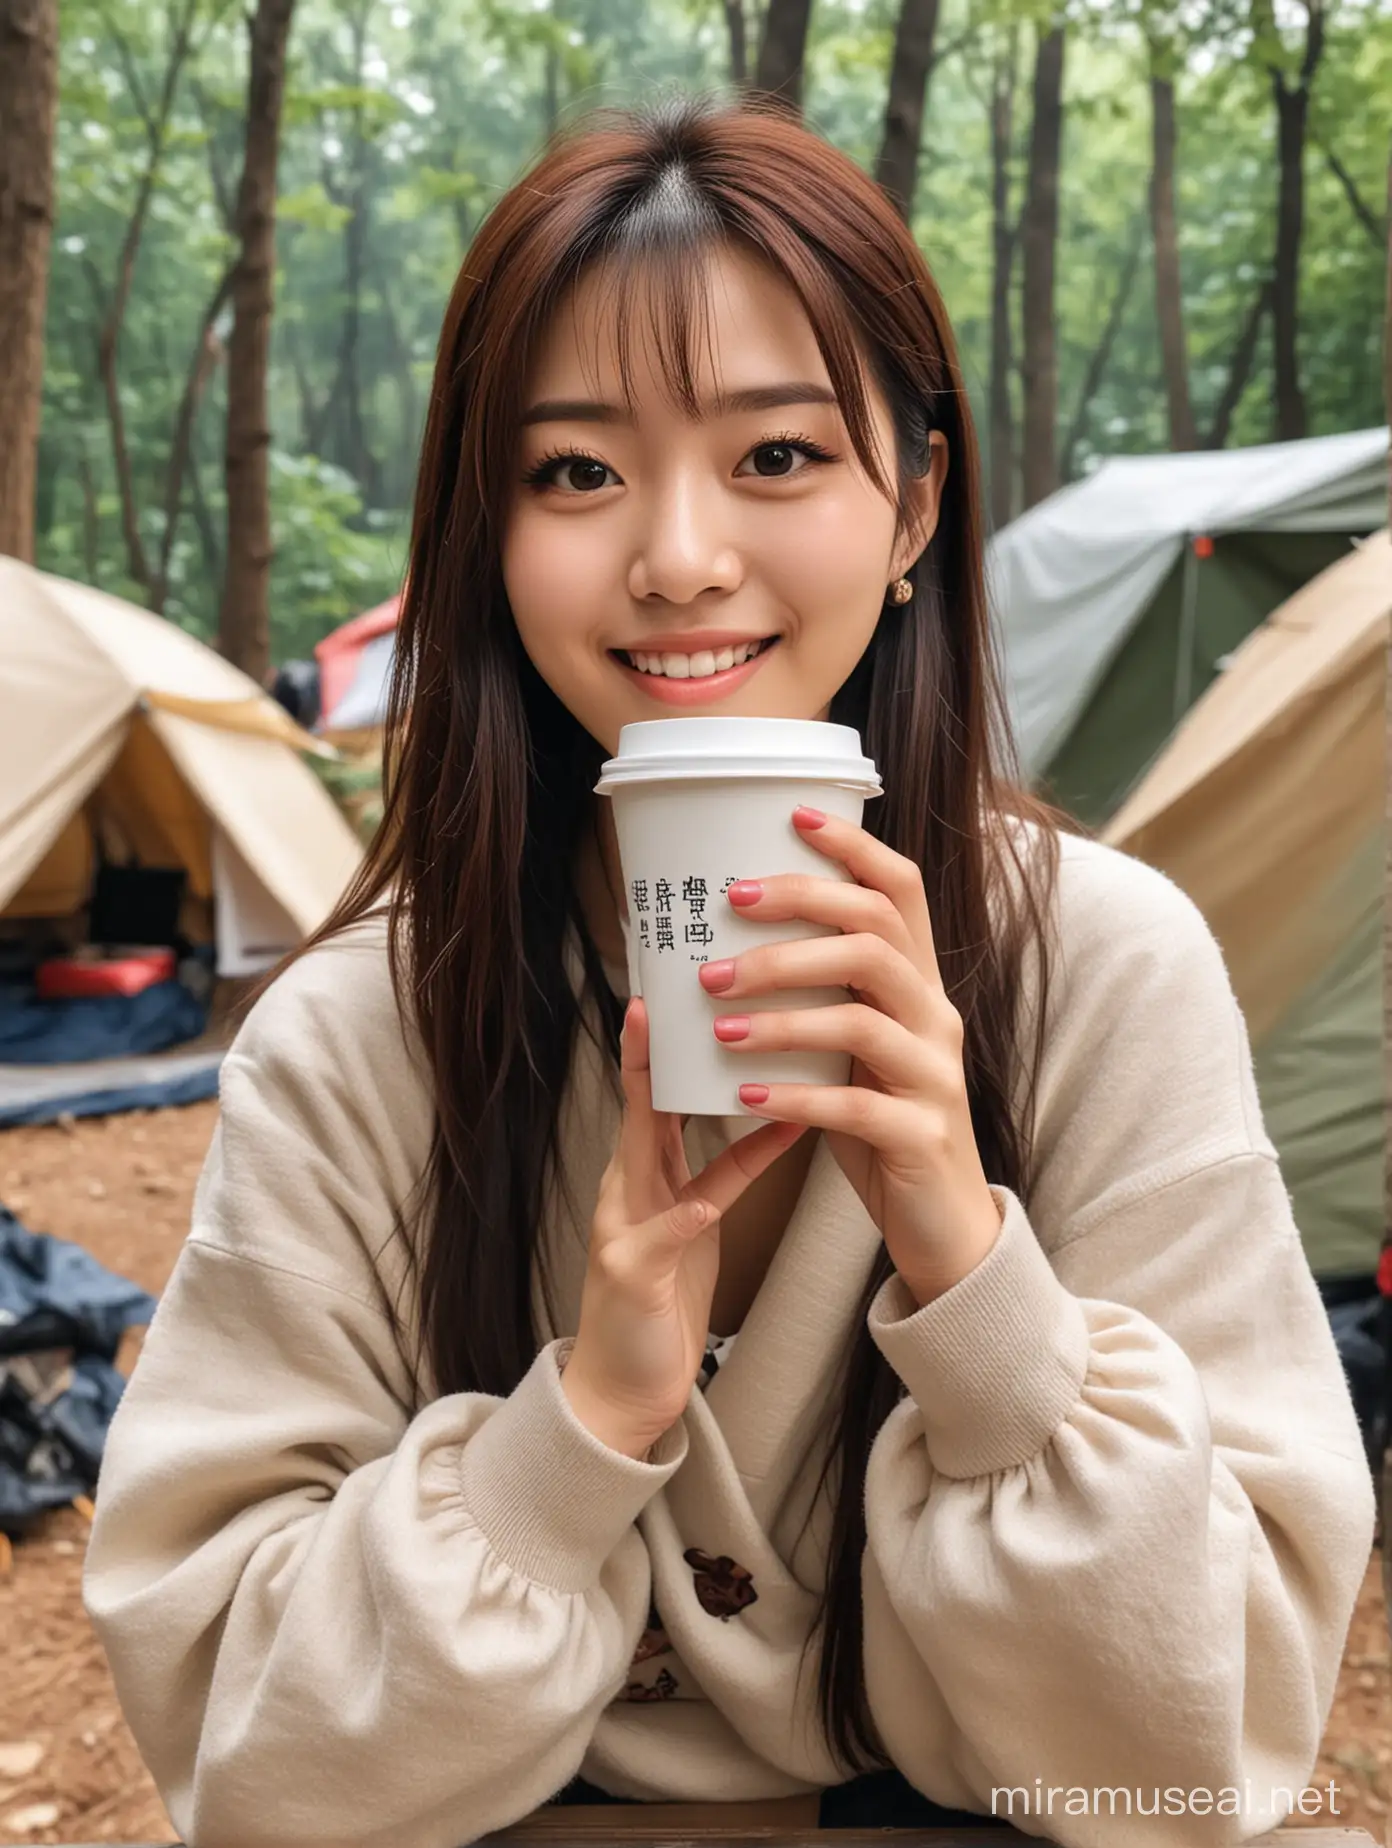 Chinese Internet Celebrity Enjoying Coffee in a Cozy Camping Ambiance